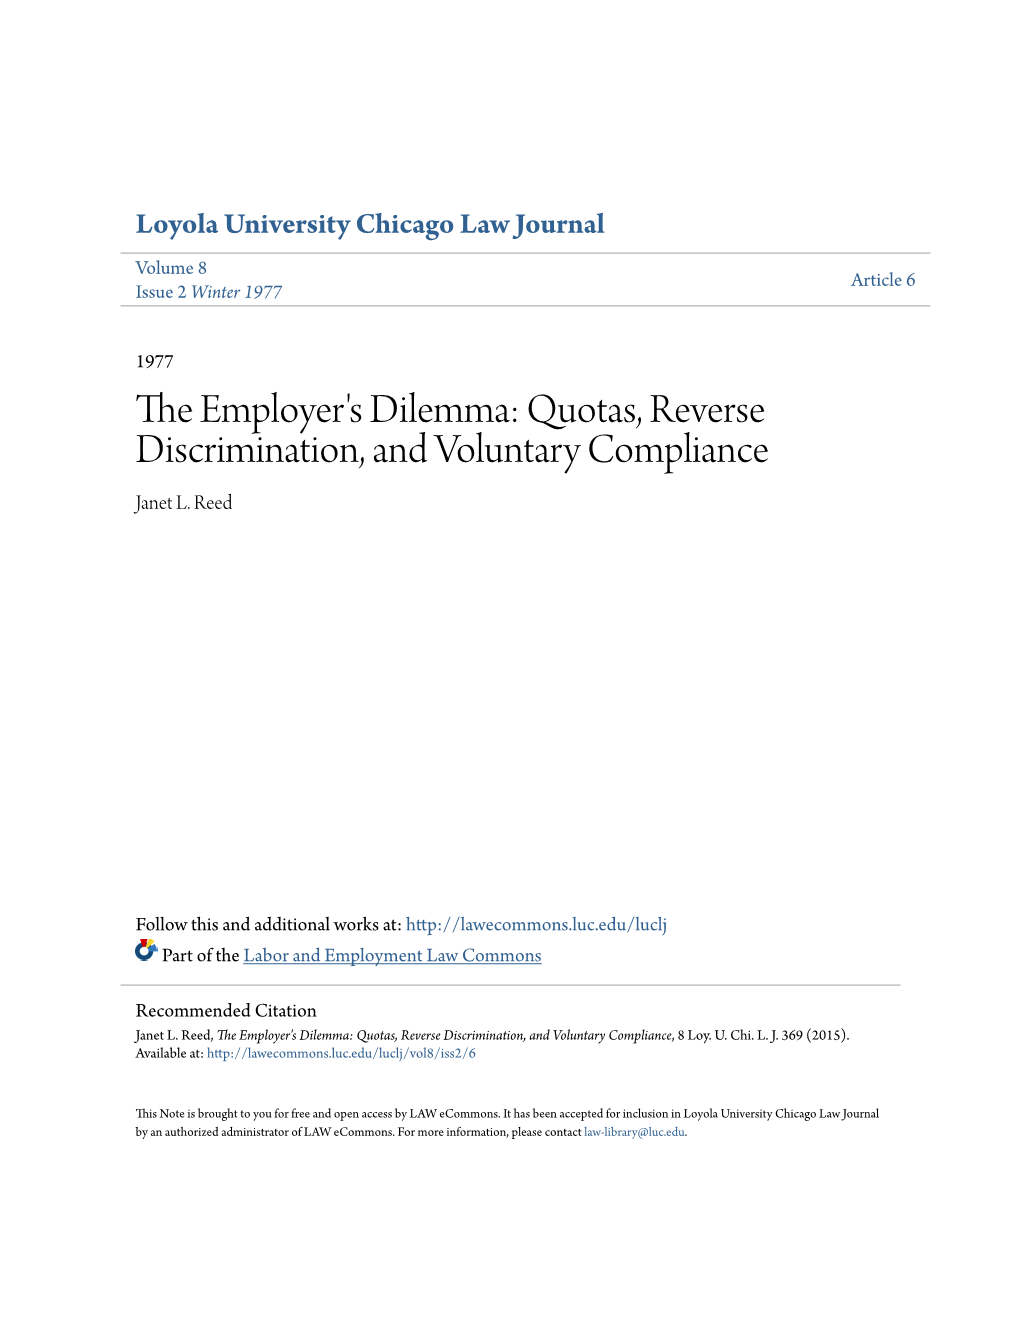 The Employer's Dilemma: Quotas, Reverse Discrimination, and Voluntary Compliance, 8 Loy